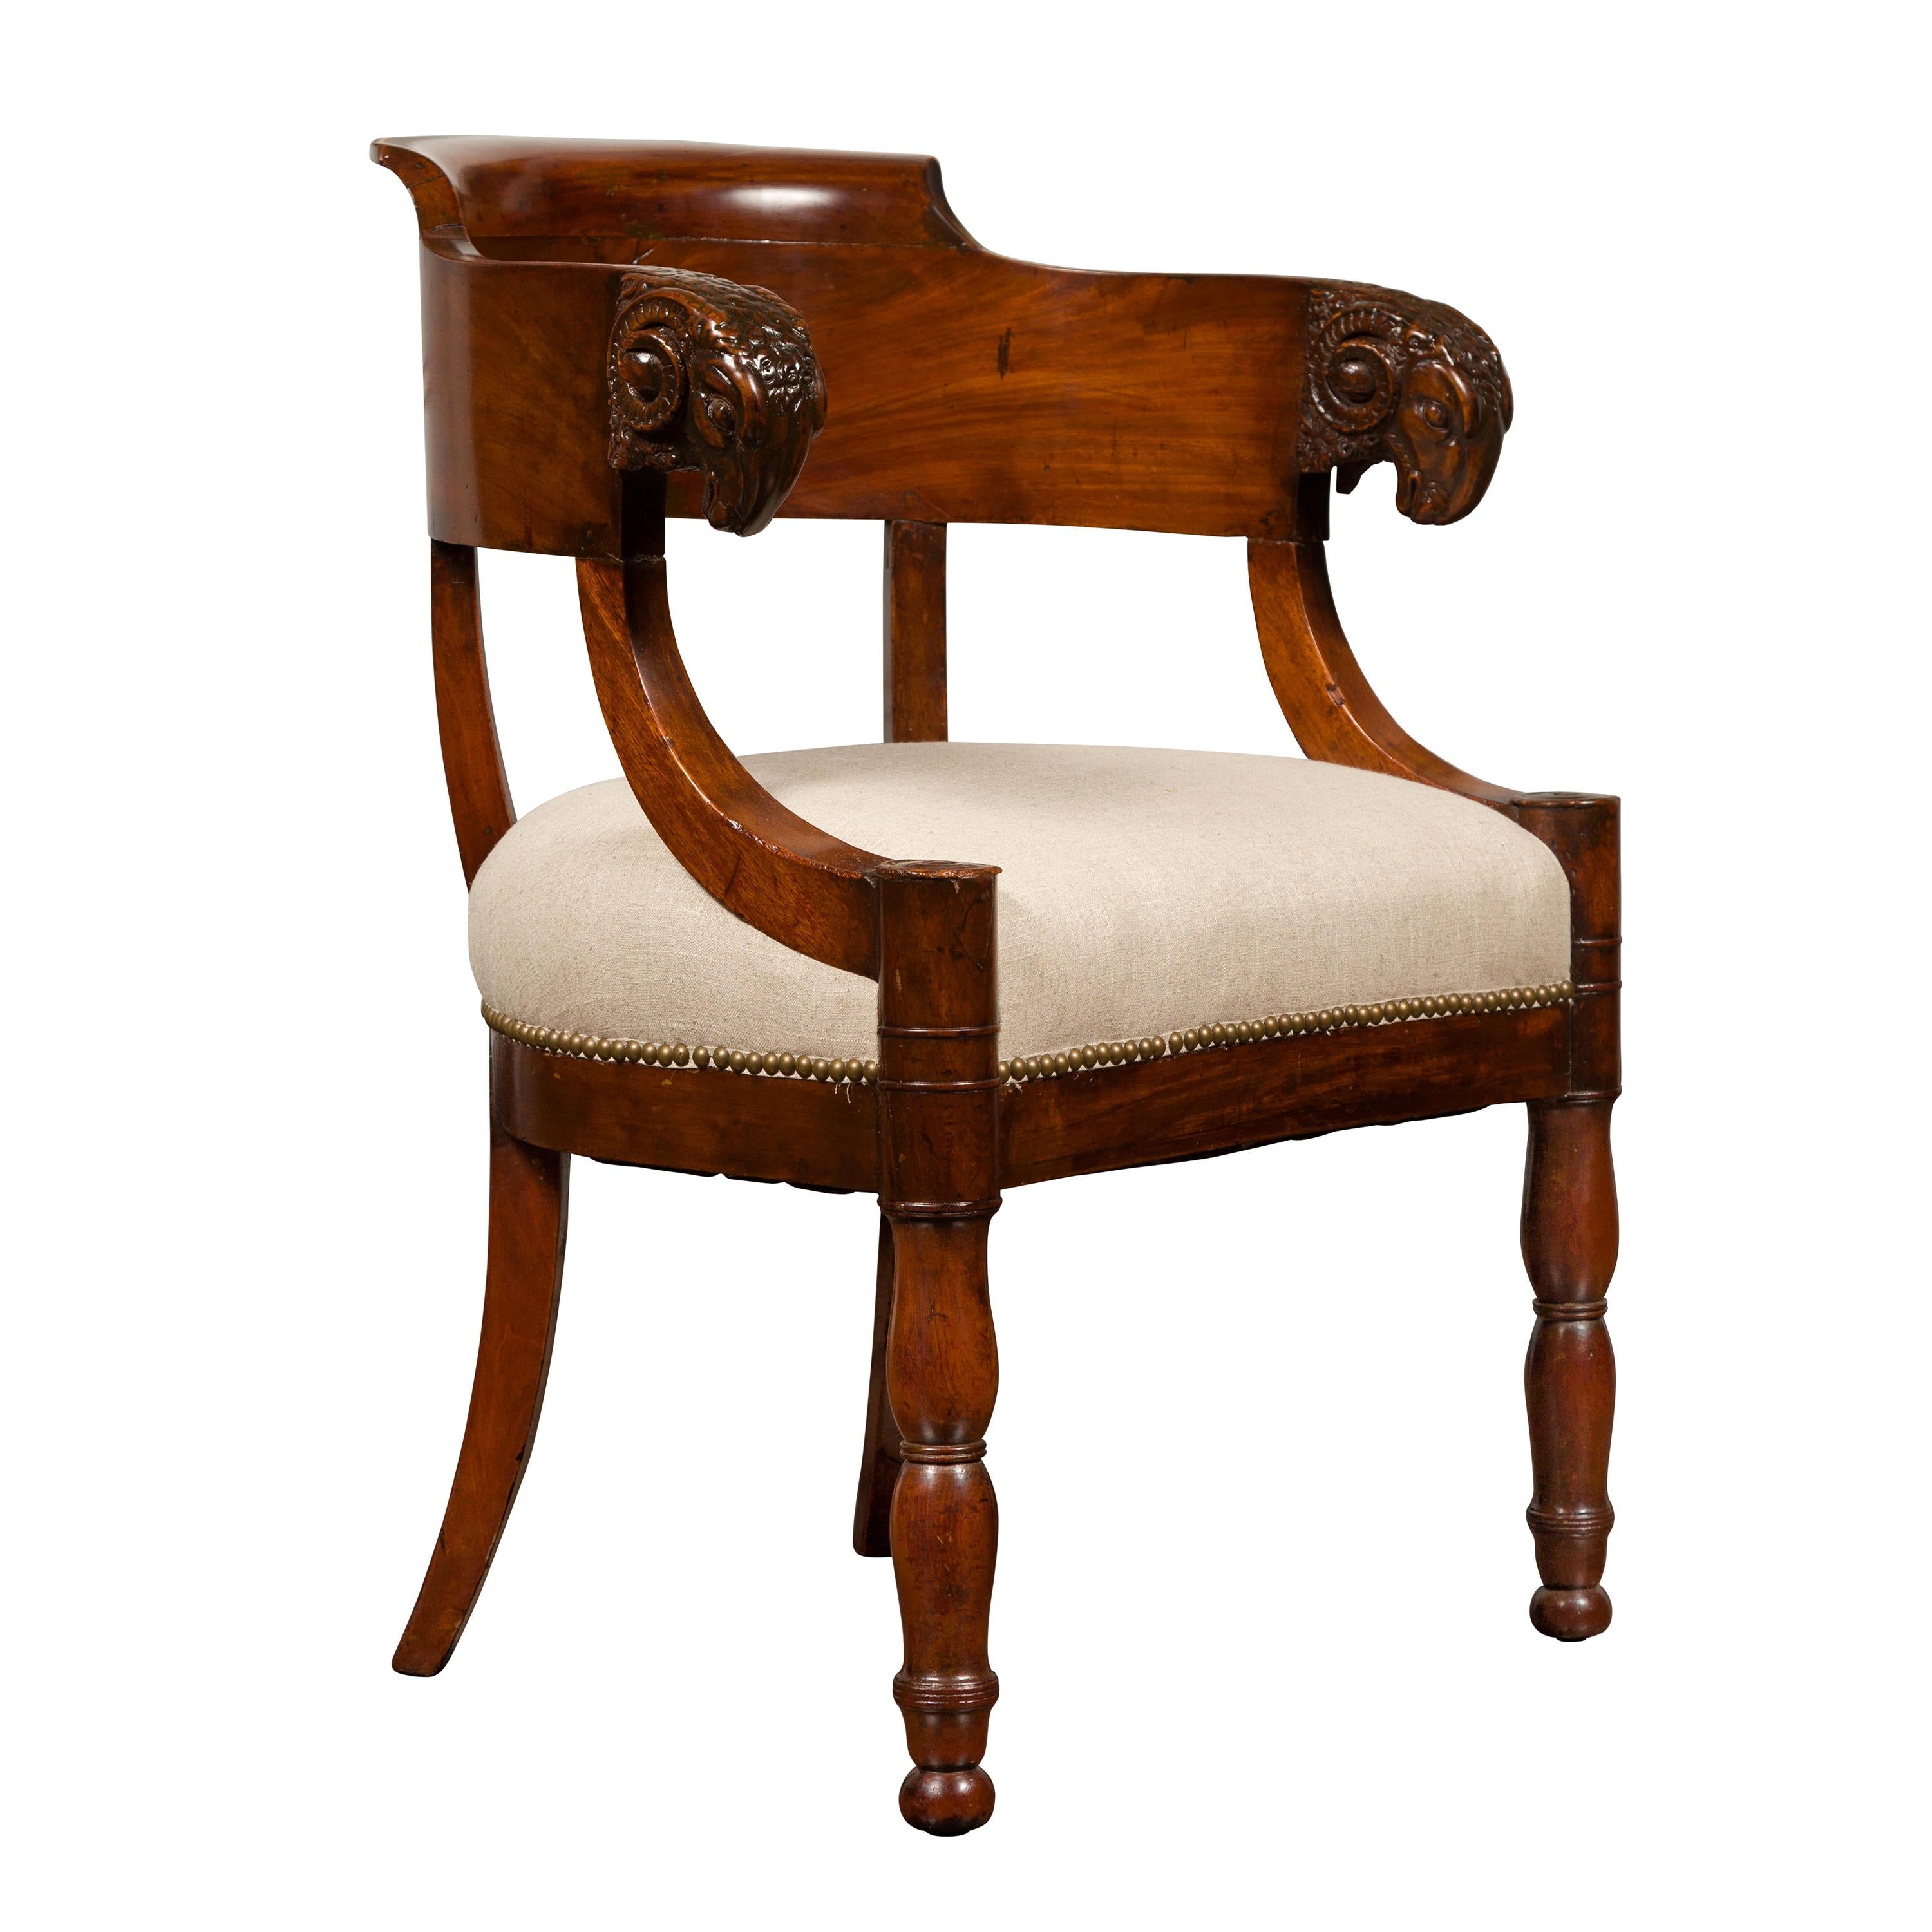 French 1830s Restauration Period Mahogany Armchair with Carved Rams' Heads